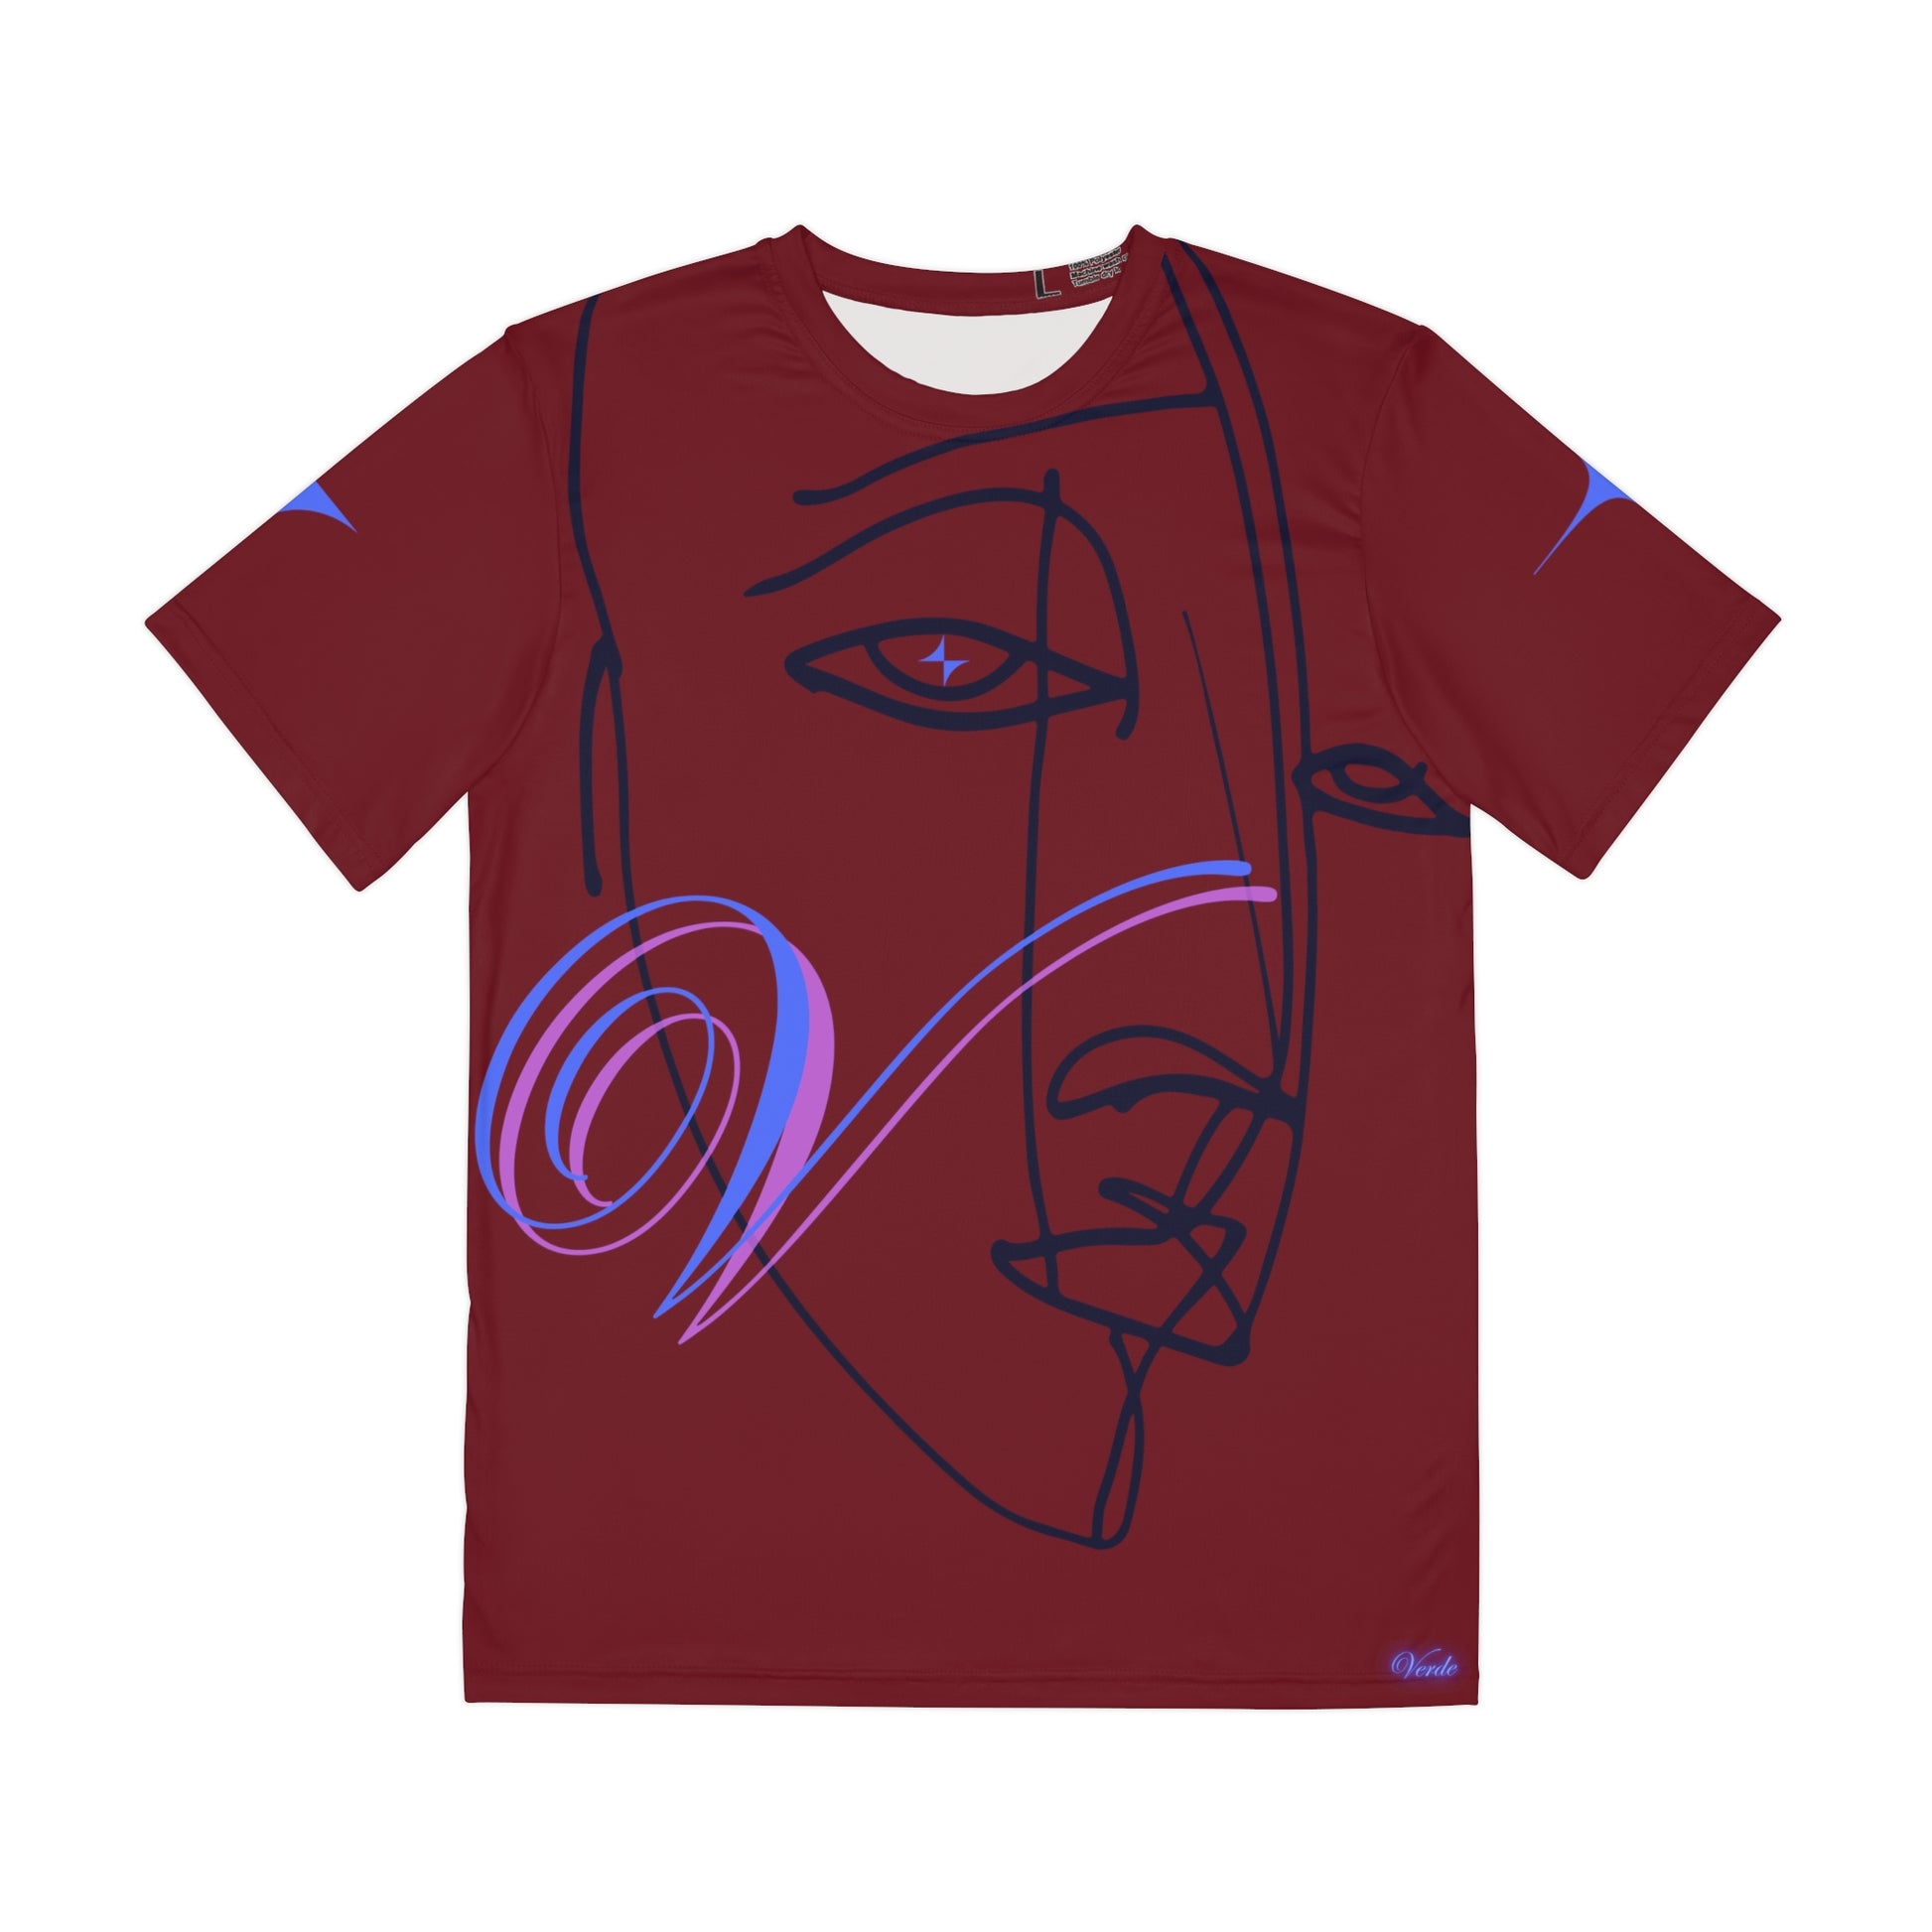 Windows to the Soul T-Shirt front